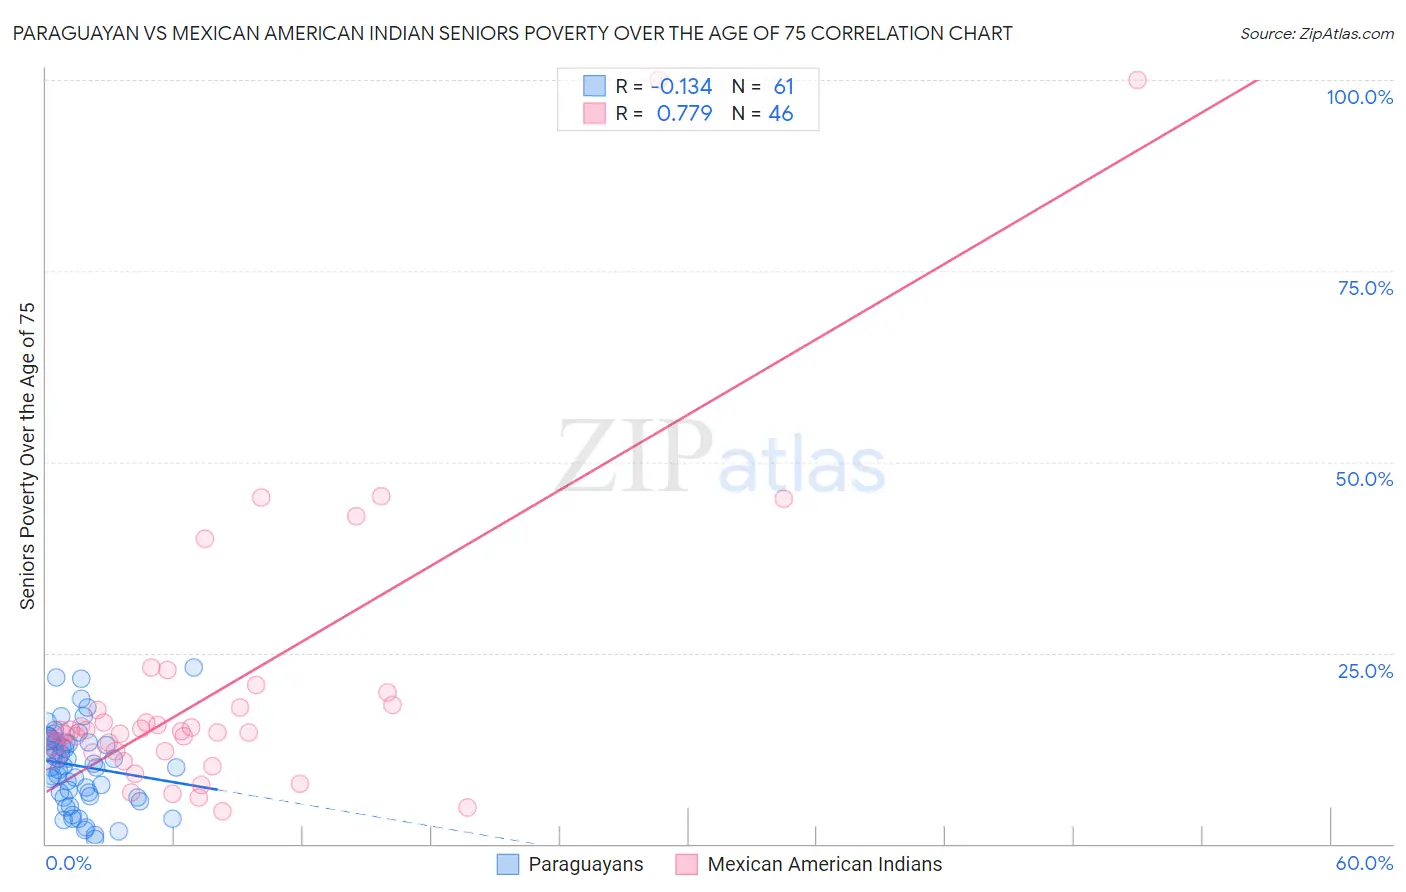 Paraguayan vs Mexican American Indian Seniors Poverty Over the Age of 75